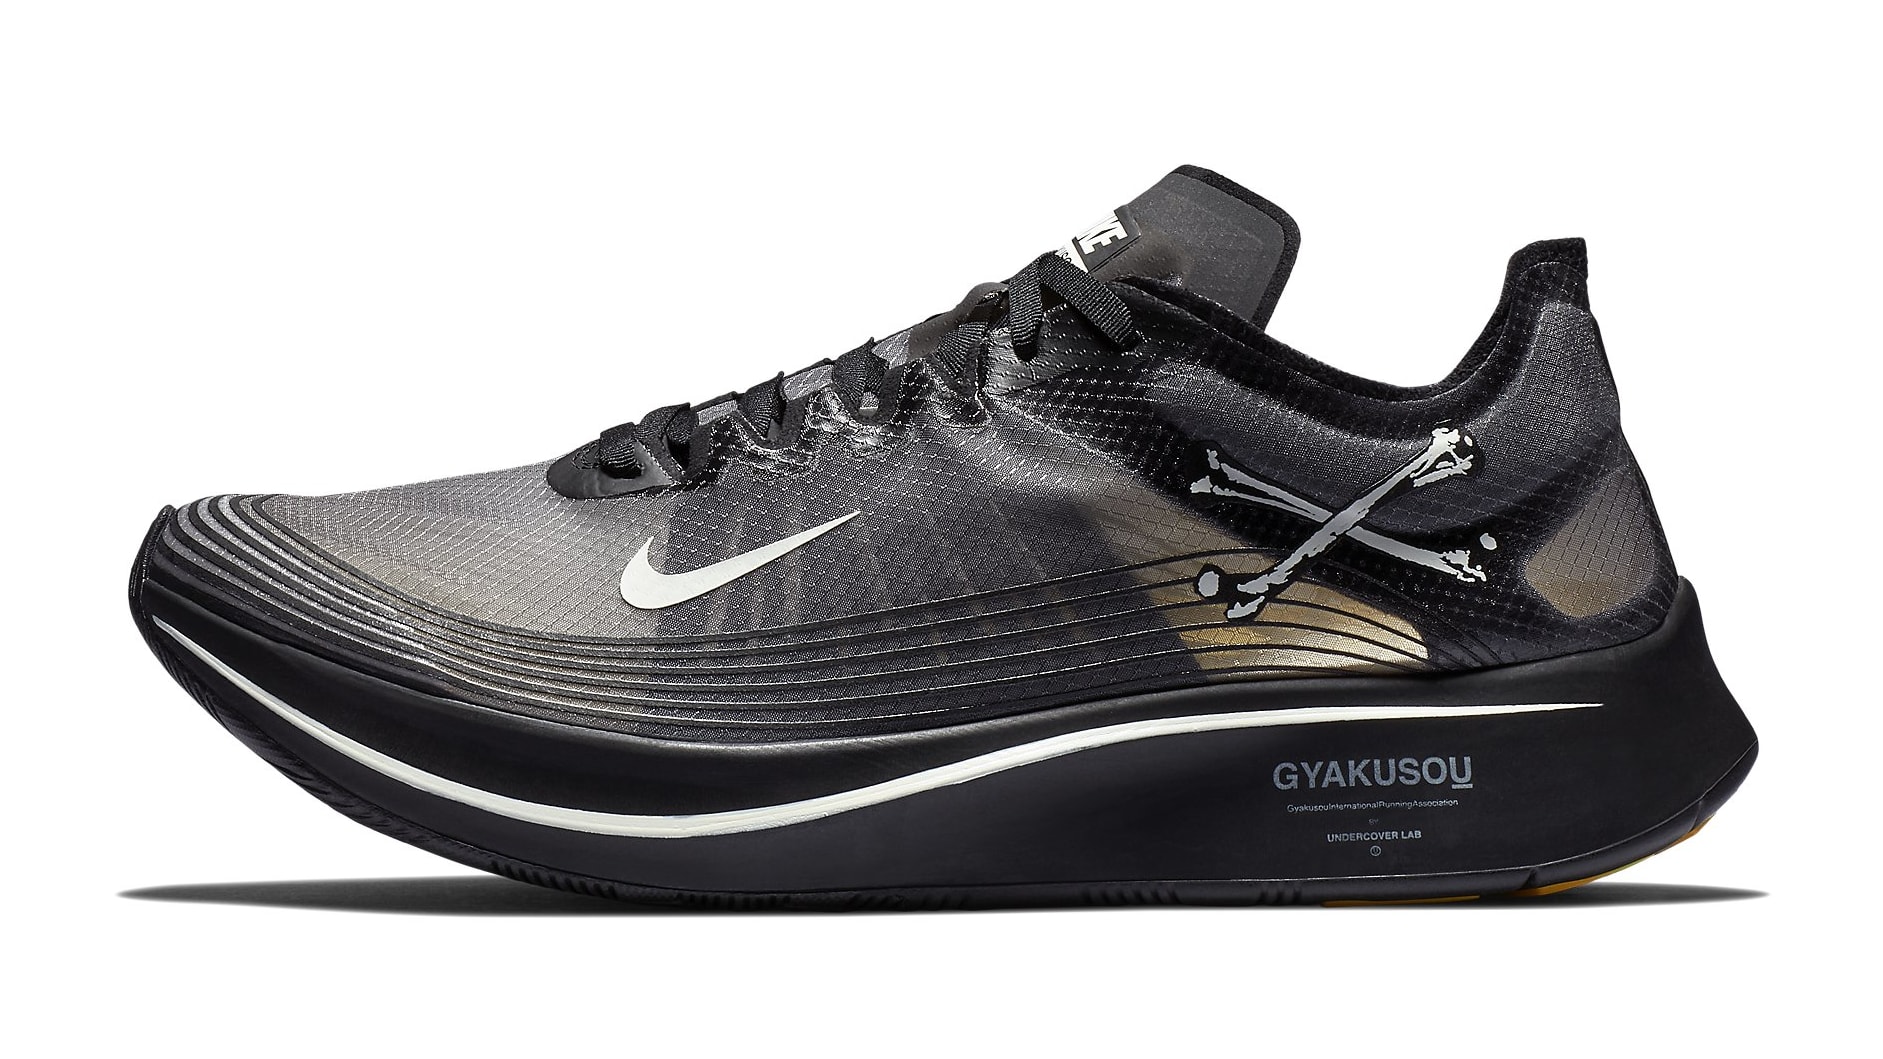 undercover-dyakusou-nike-zoom-fly-sp-black-ar4349-001-lateral